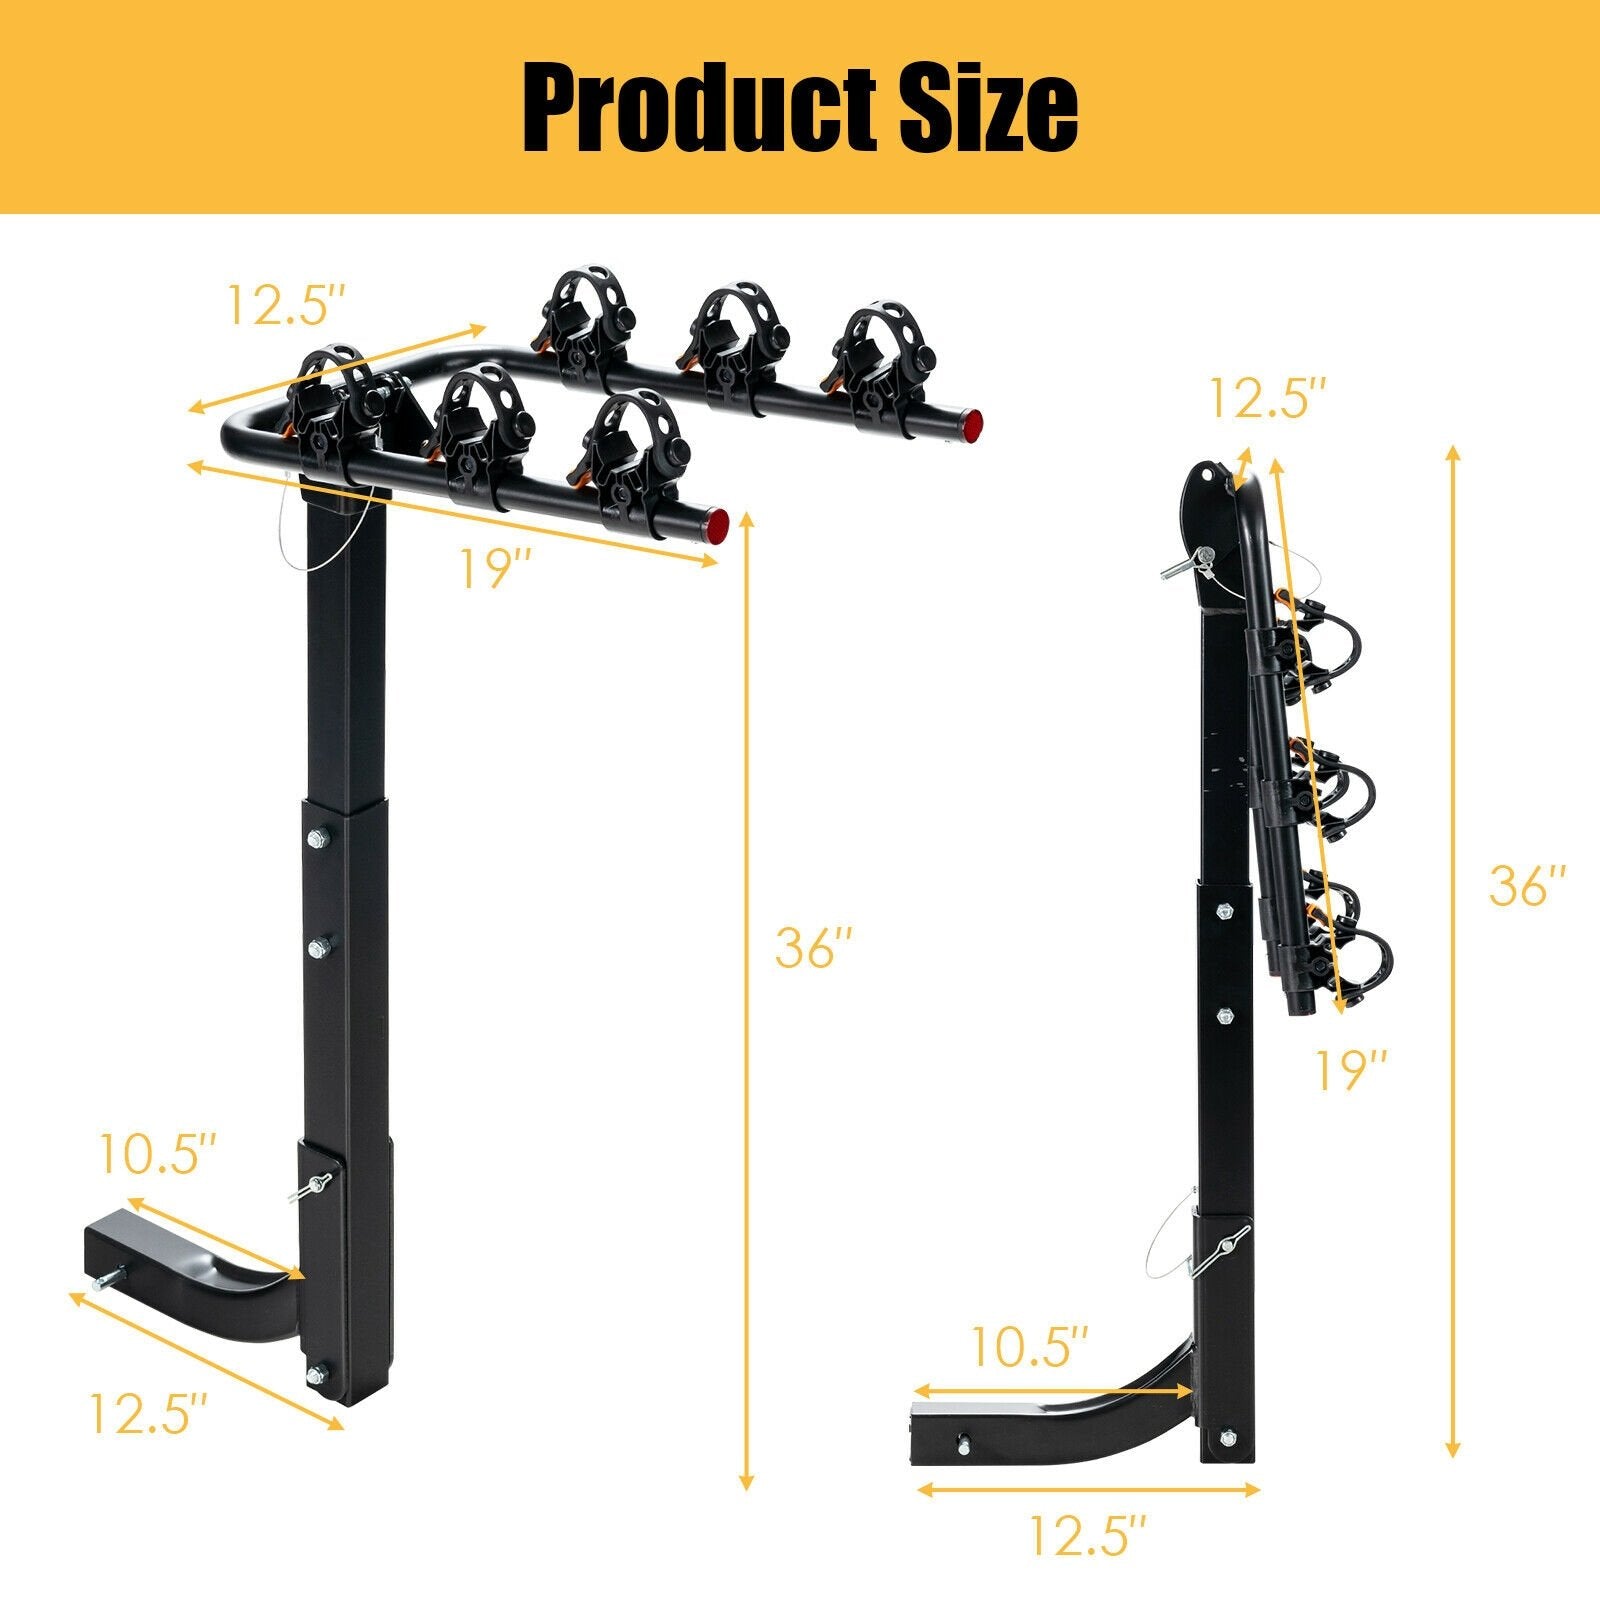 3/4-Bike Hitch Mount Rack with Safety Strap for Car Truck SUV-3-Bike, Black - Gallery Canada